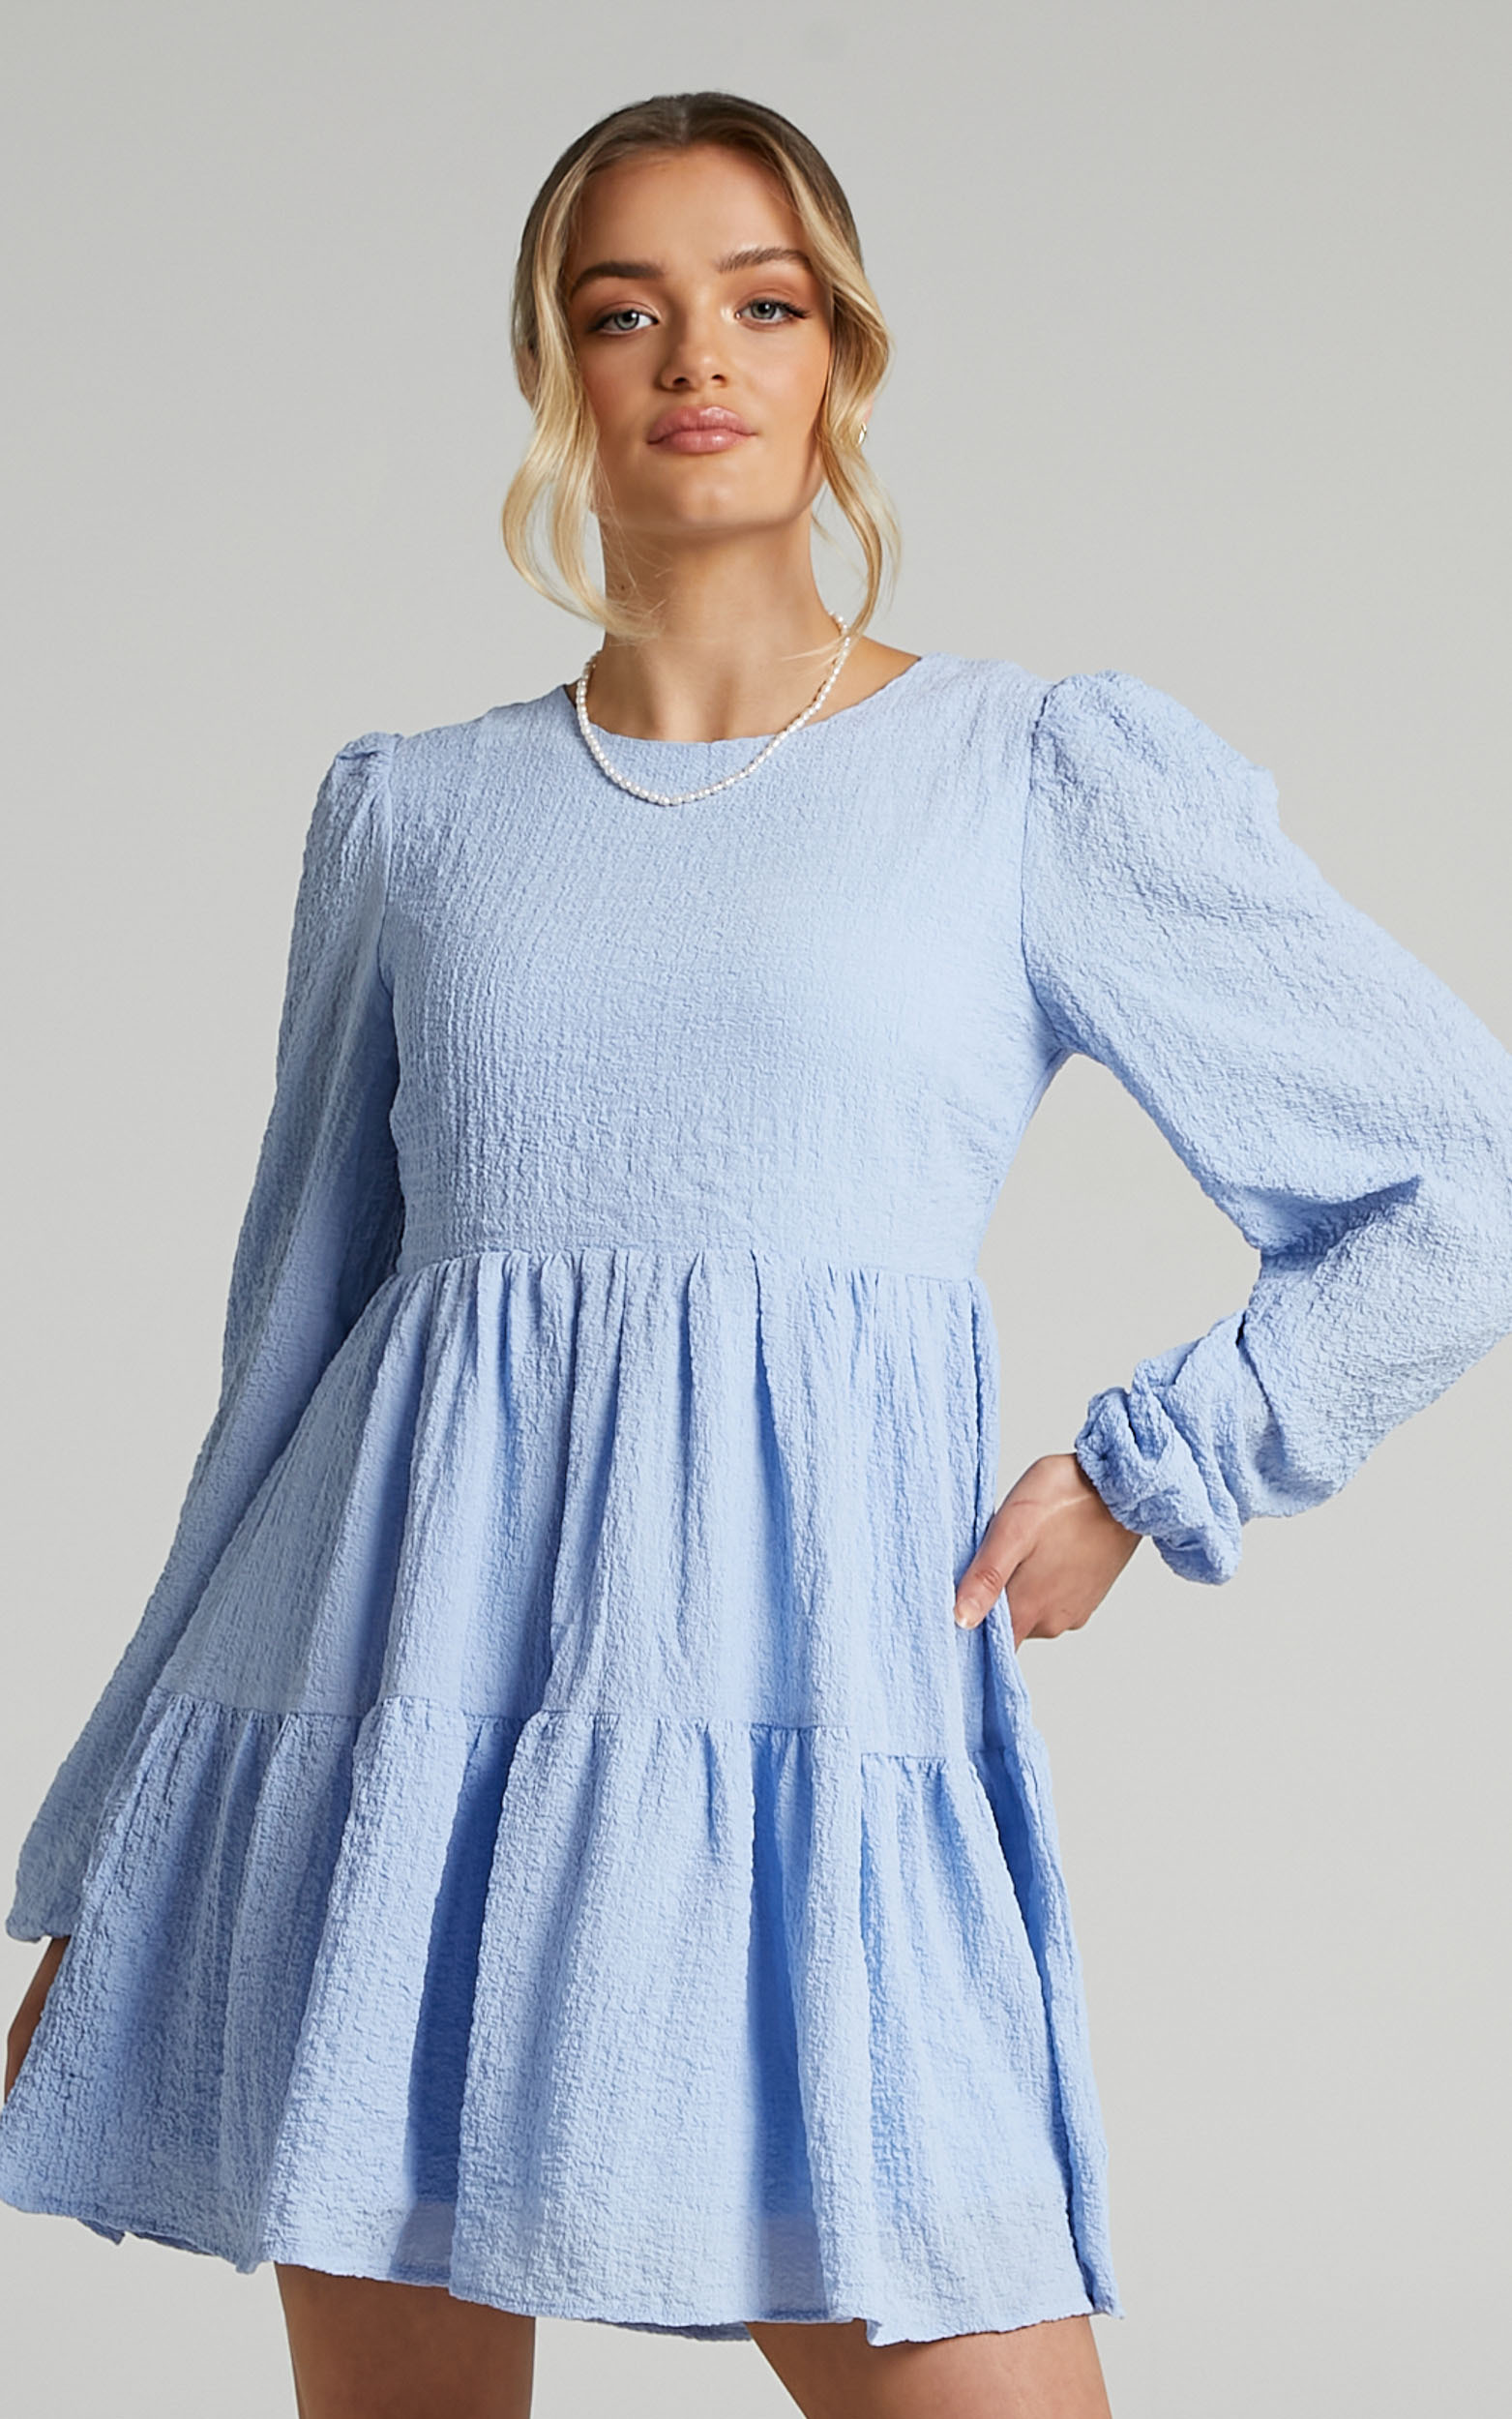 Marney Long Sleeve Tiered Shift Dress in Blue - 04, BLU1, hi-res image number null